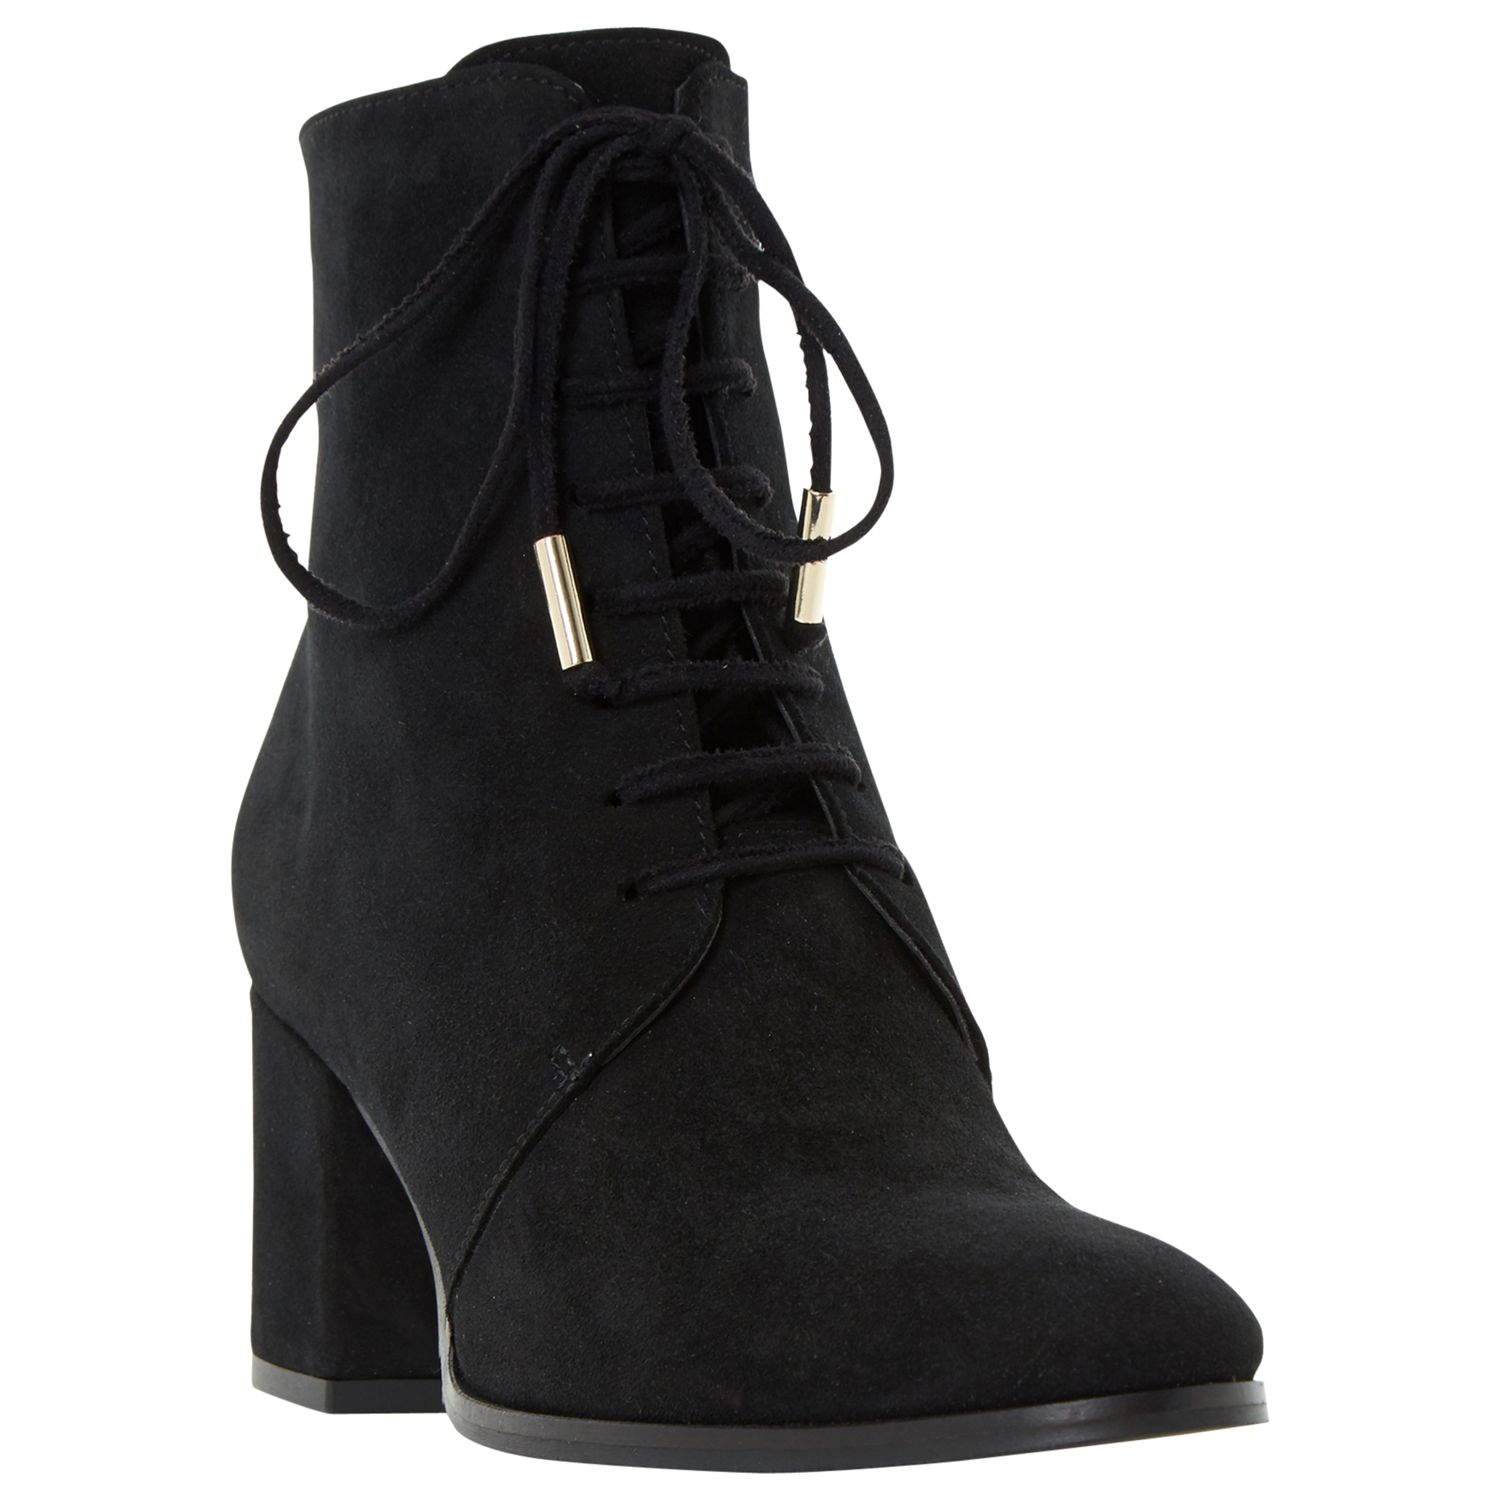 Dune Olita Lace Up Ankle Boots, Black, 5